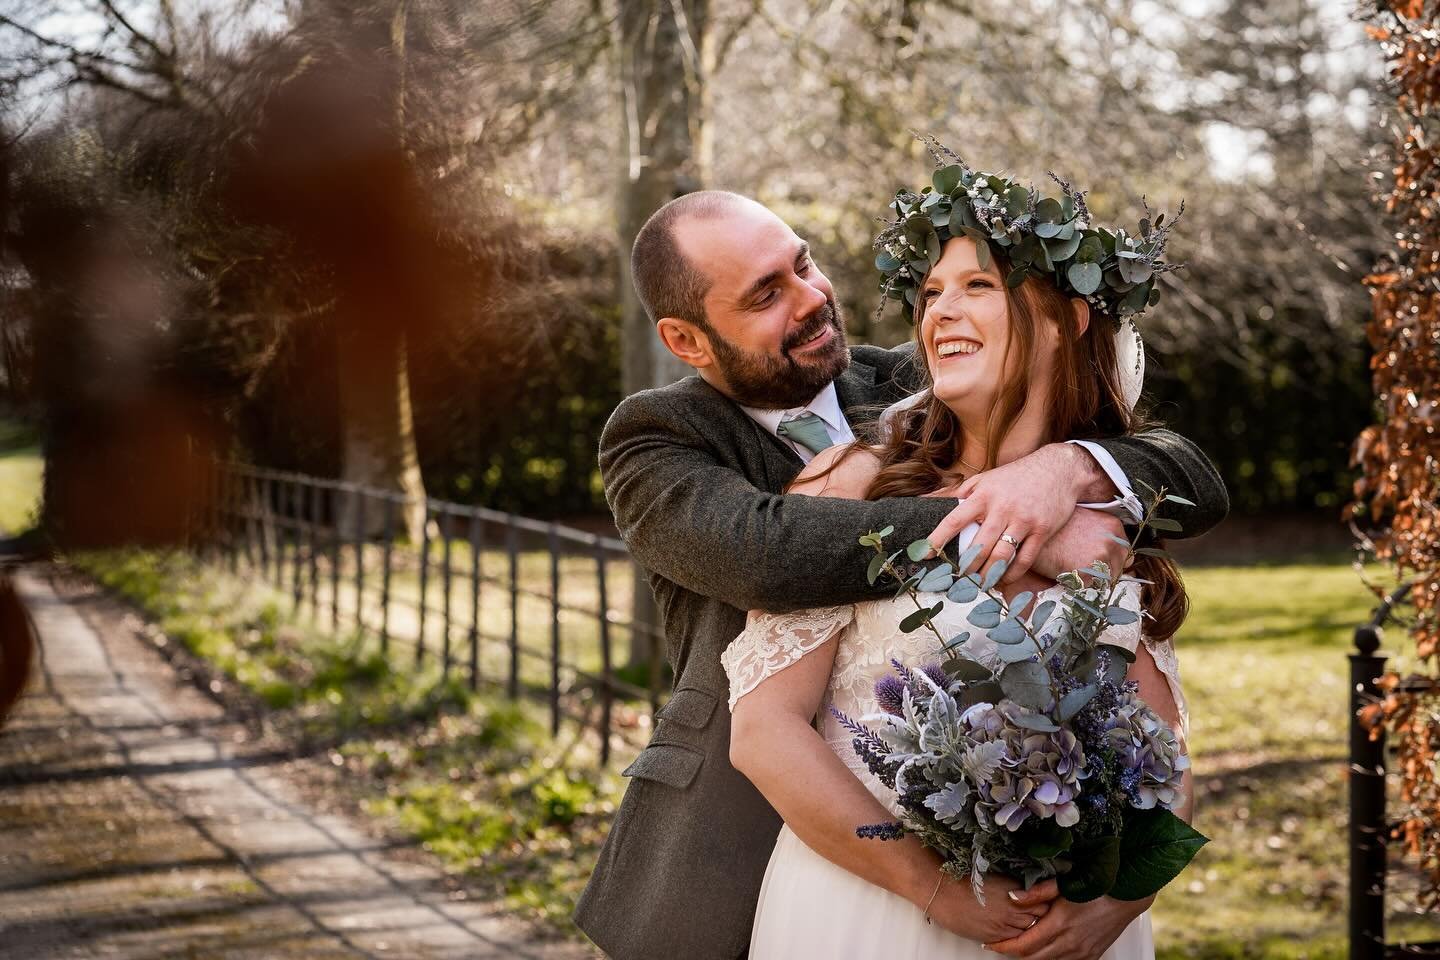 It&rsquo;s gallery delivery day for Steph and John! ⚡️

Loved capturing their day at @meols_hall back in March! 📸

⚠️ 2024 is 65% booked! ⚠️

⚠️ 2025 is 40% booked! ⚠️

✅ Now taking bookings for 2026 ✅

⚡ Natural and Authentic Photography for Fun Co